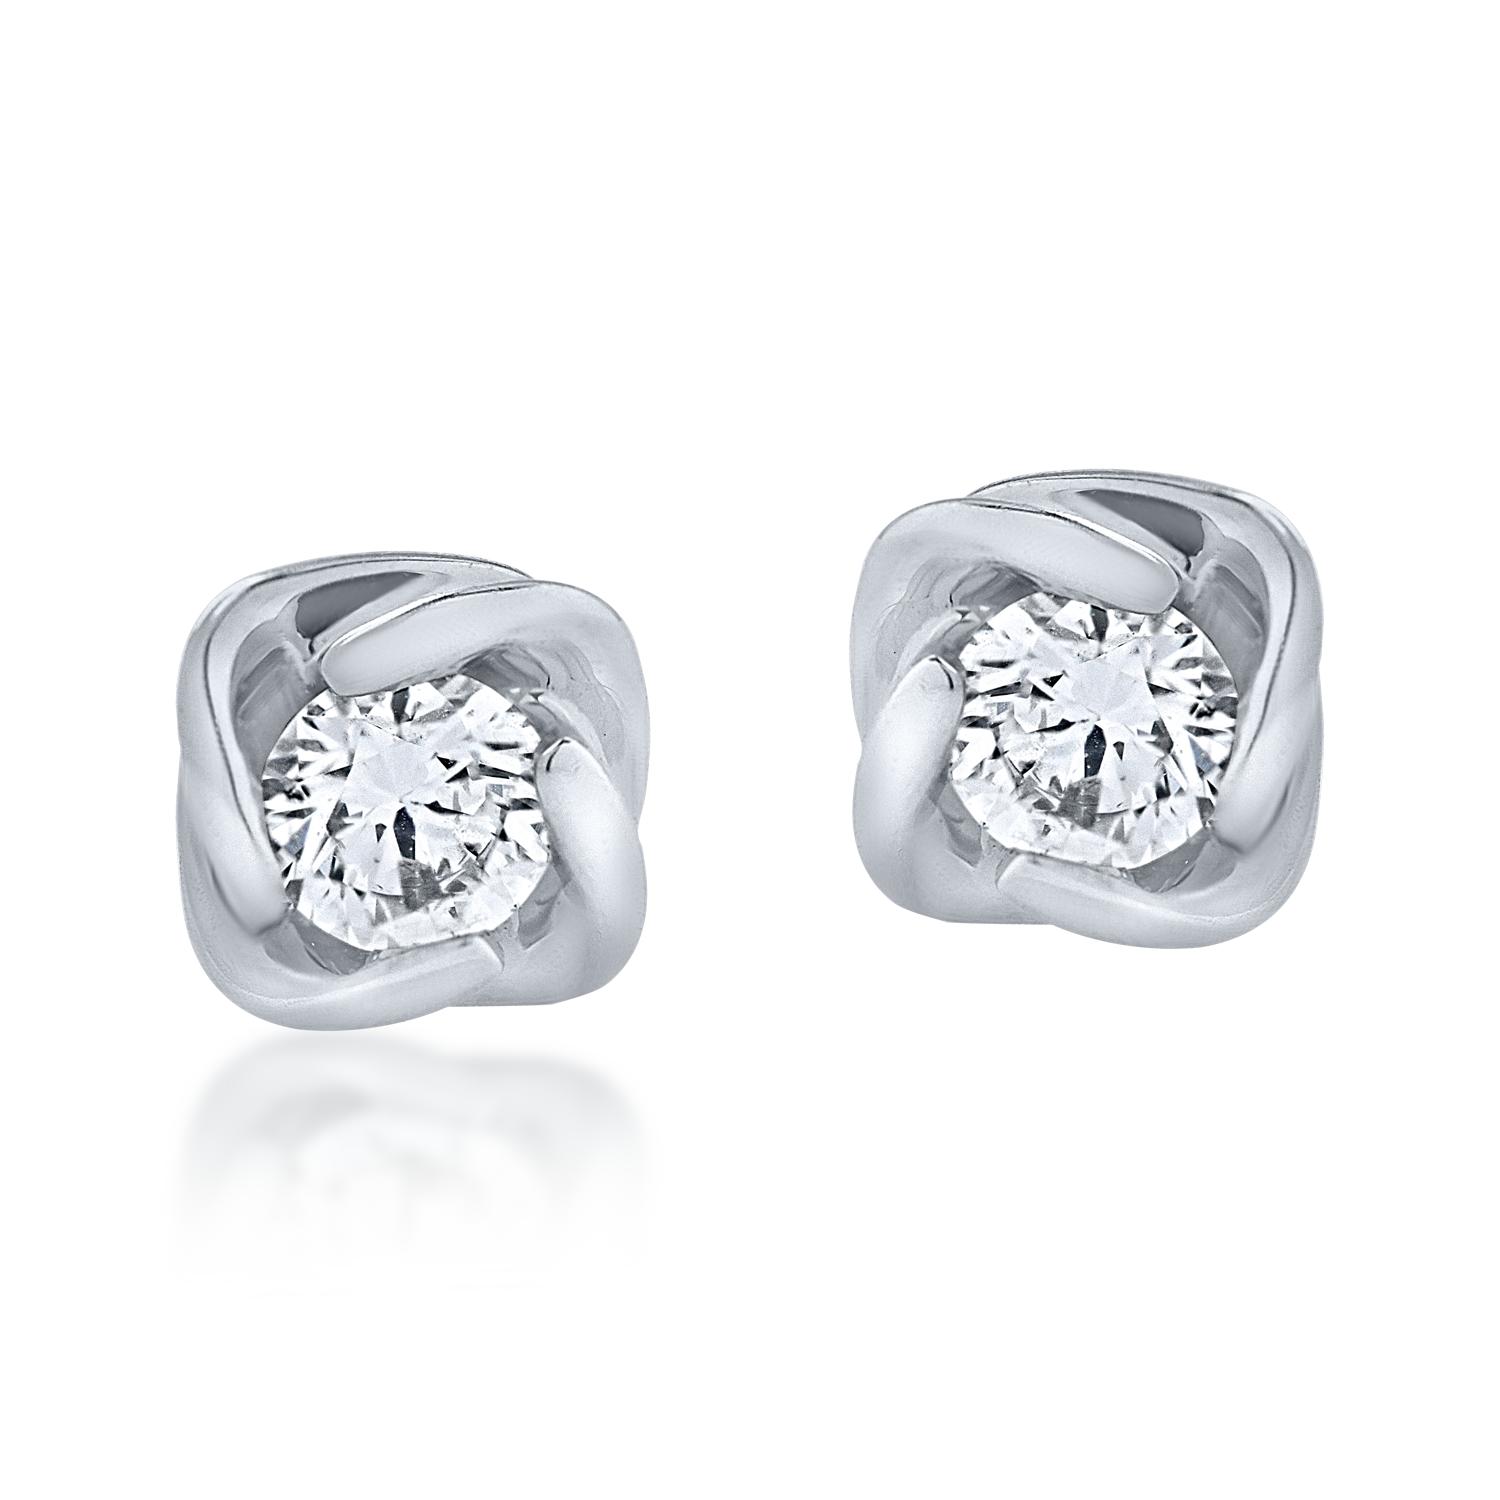 White gold earrings with 0.11ct diamonds